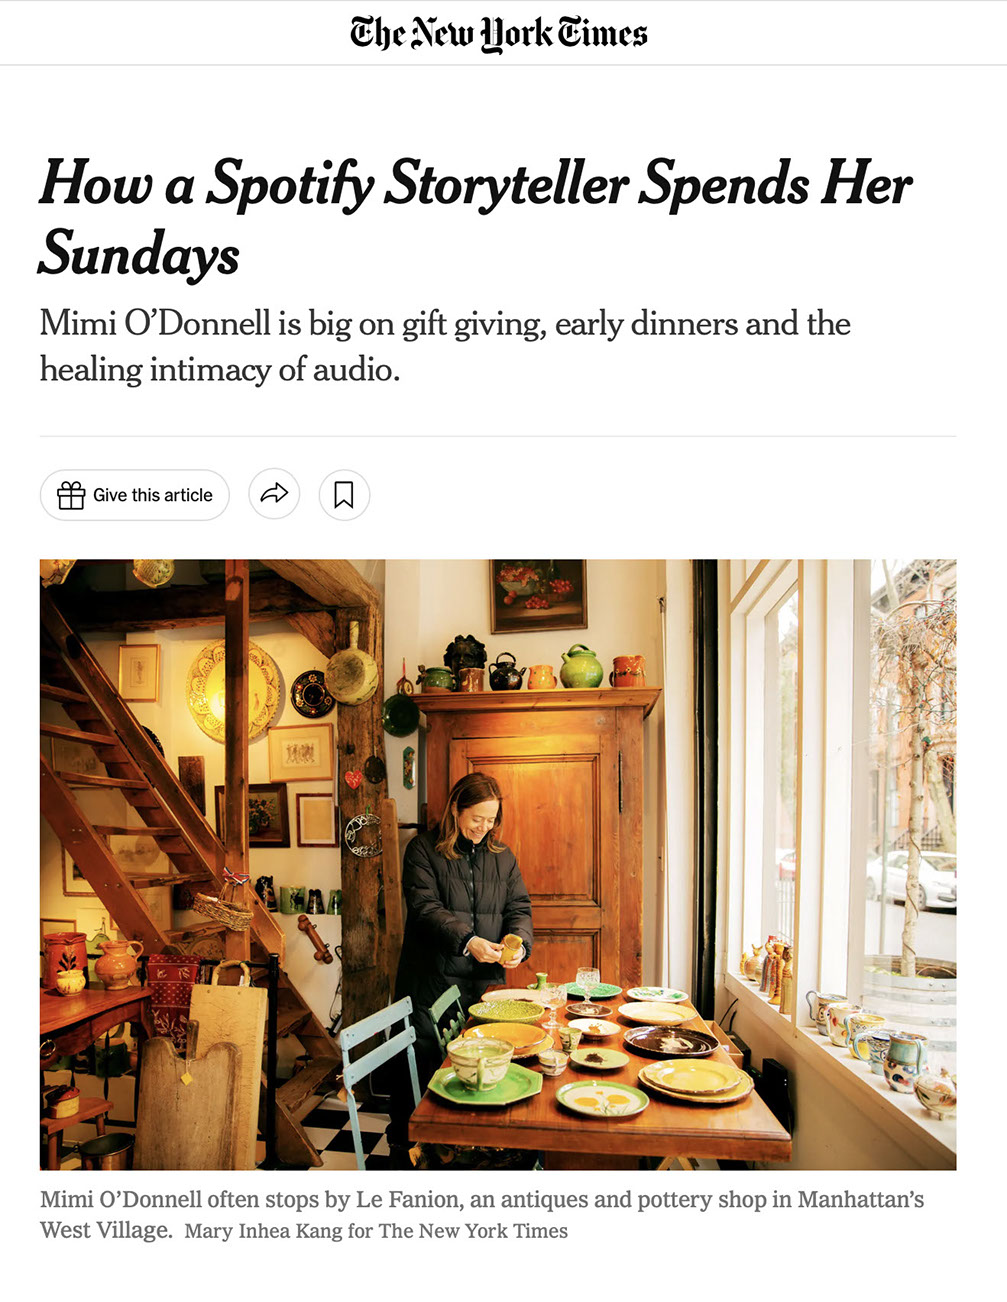 New York Times article about Mimi O'Donnell